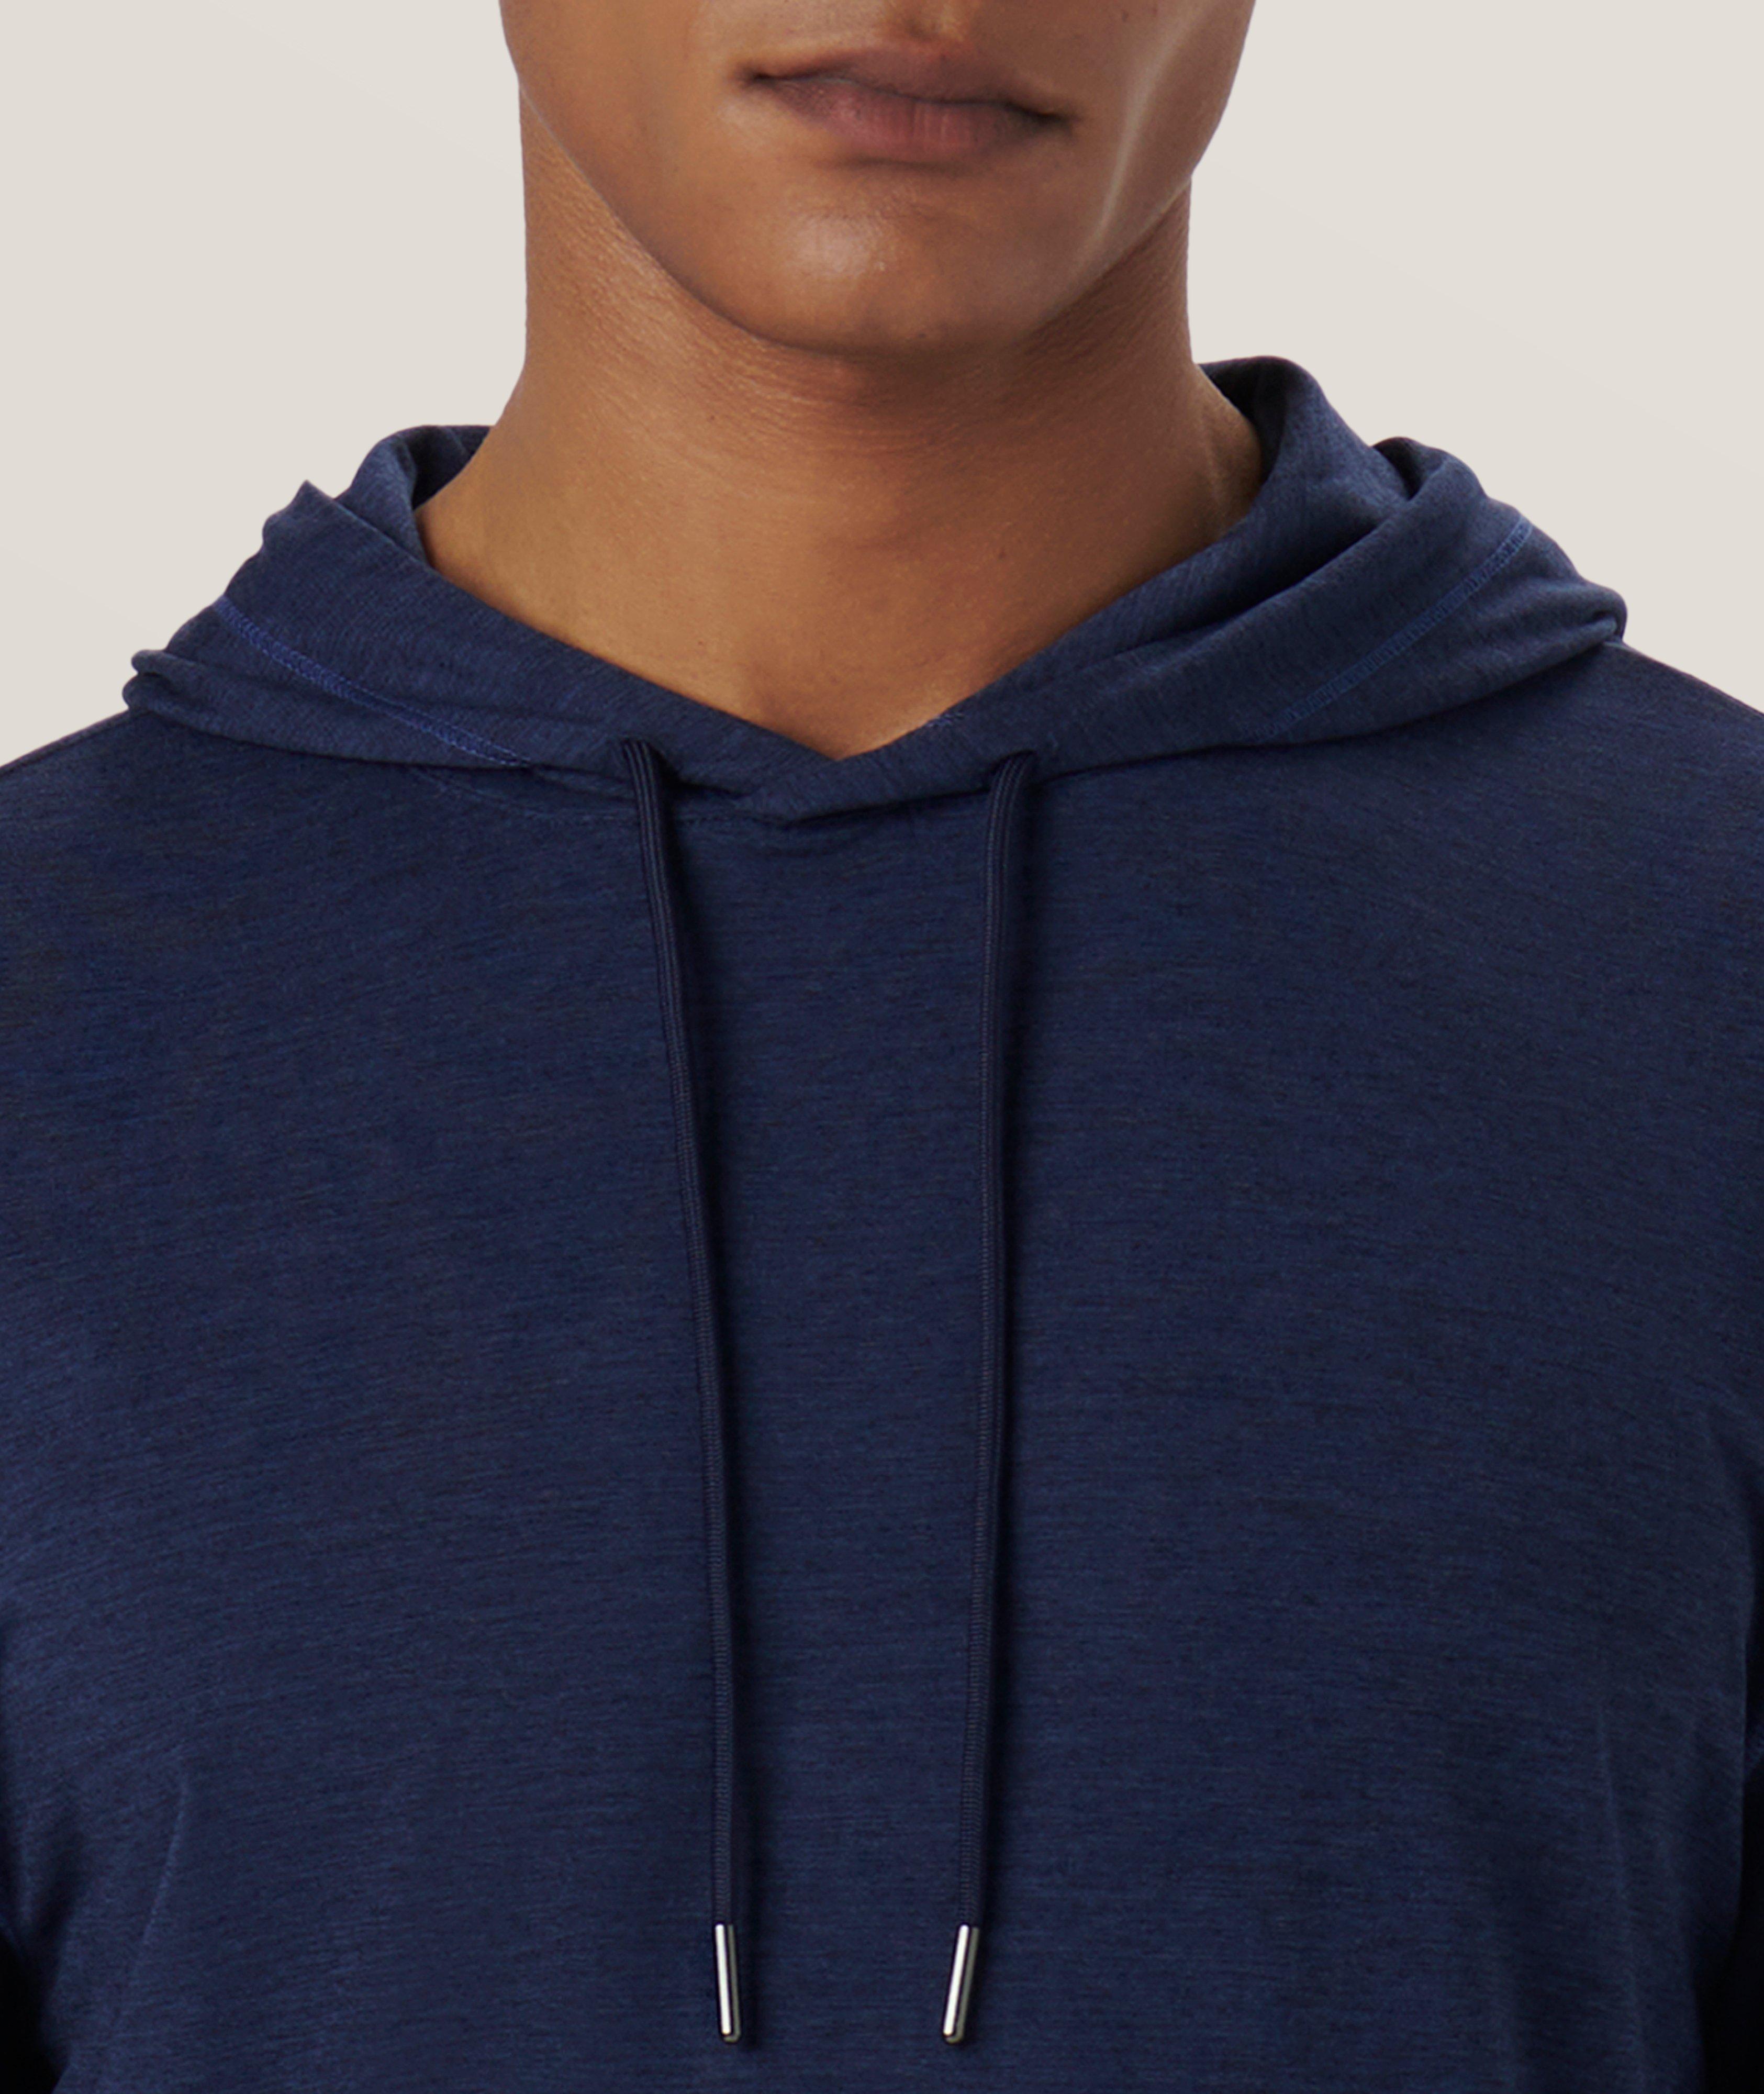 UV50 Performance Stretch-Fabric Hooded Sweater image 1